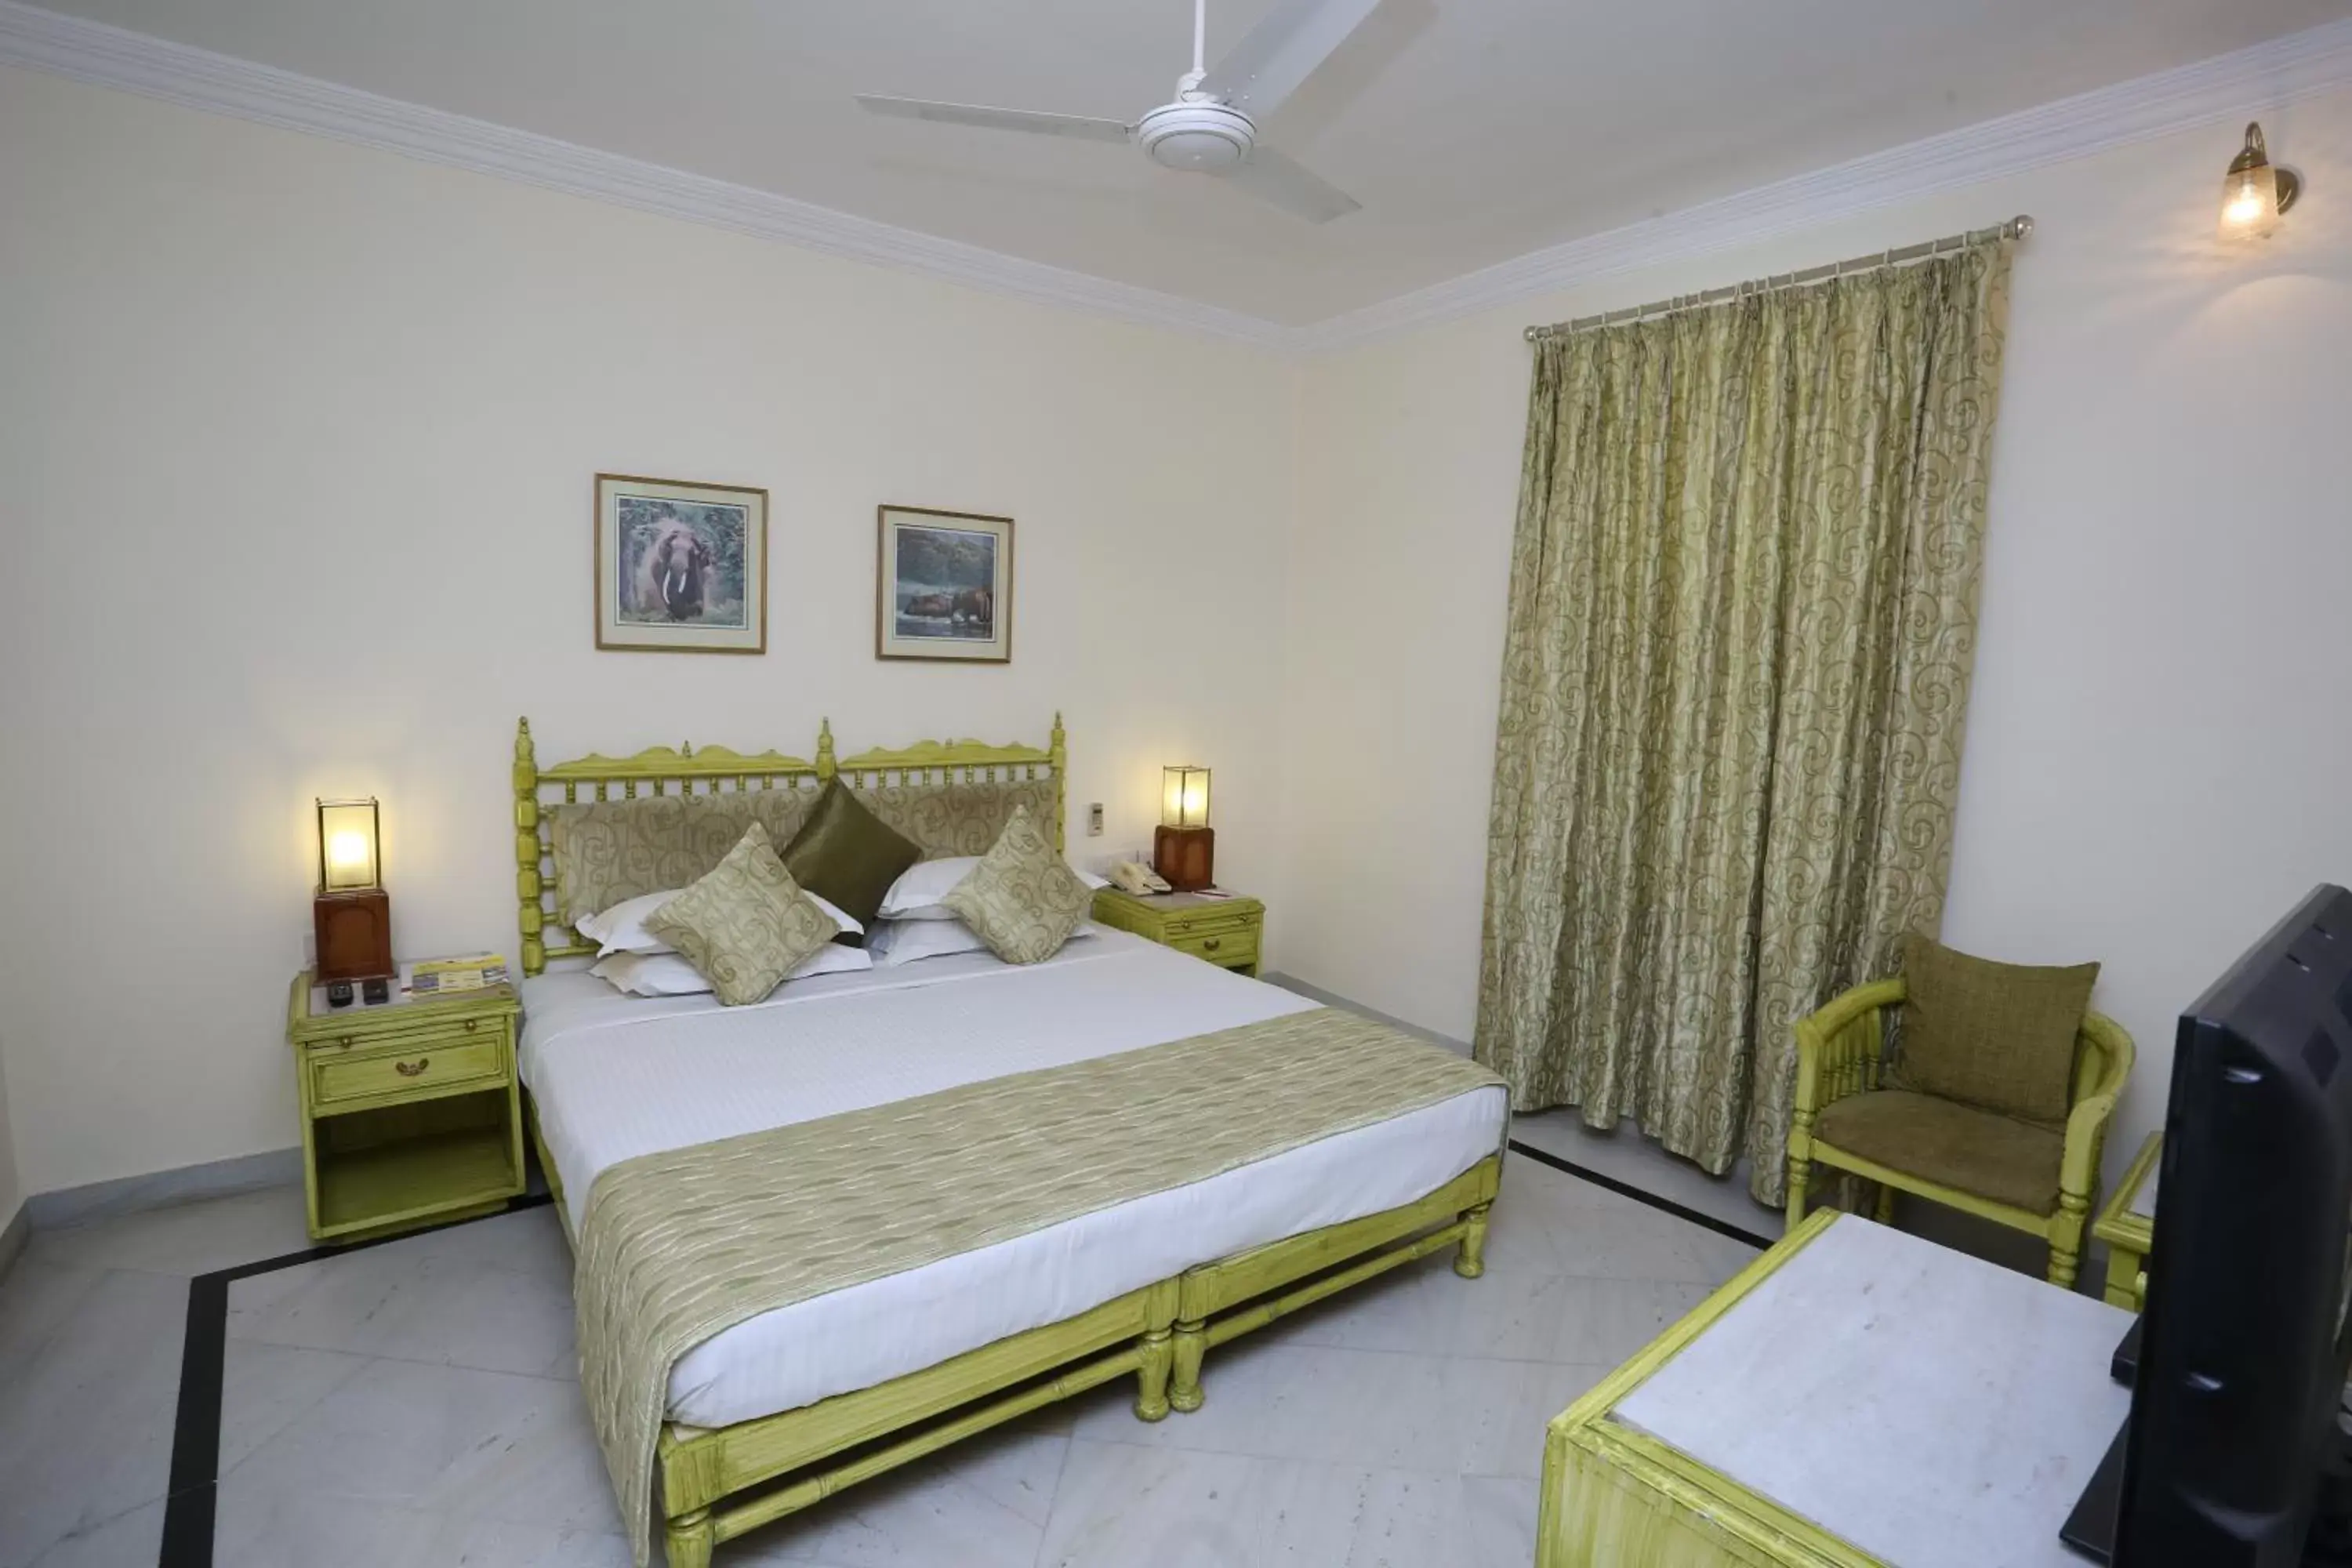 Bedroom, Room Photo in Garden Hotel by HRH Group of Hotels